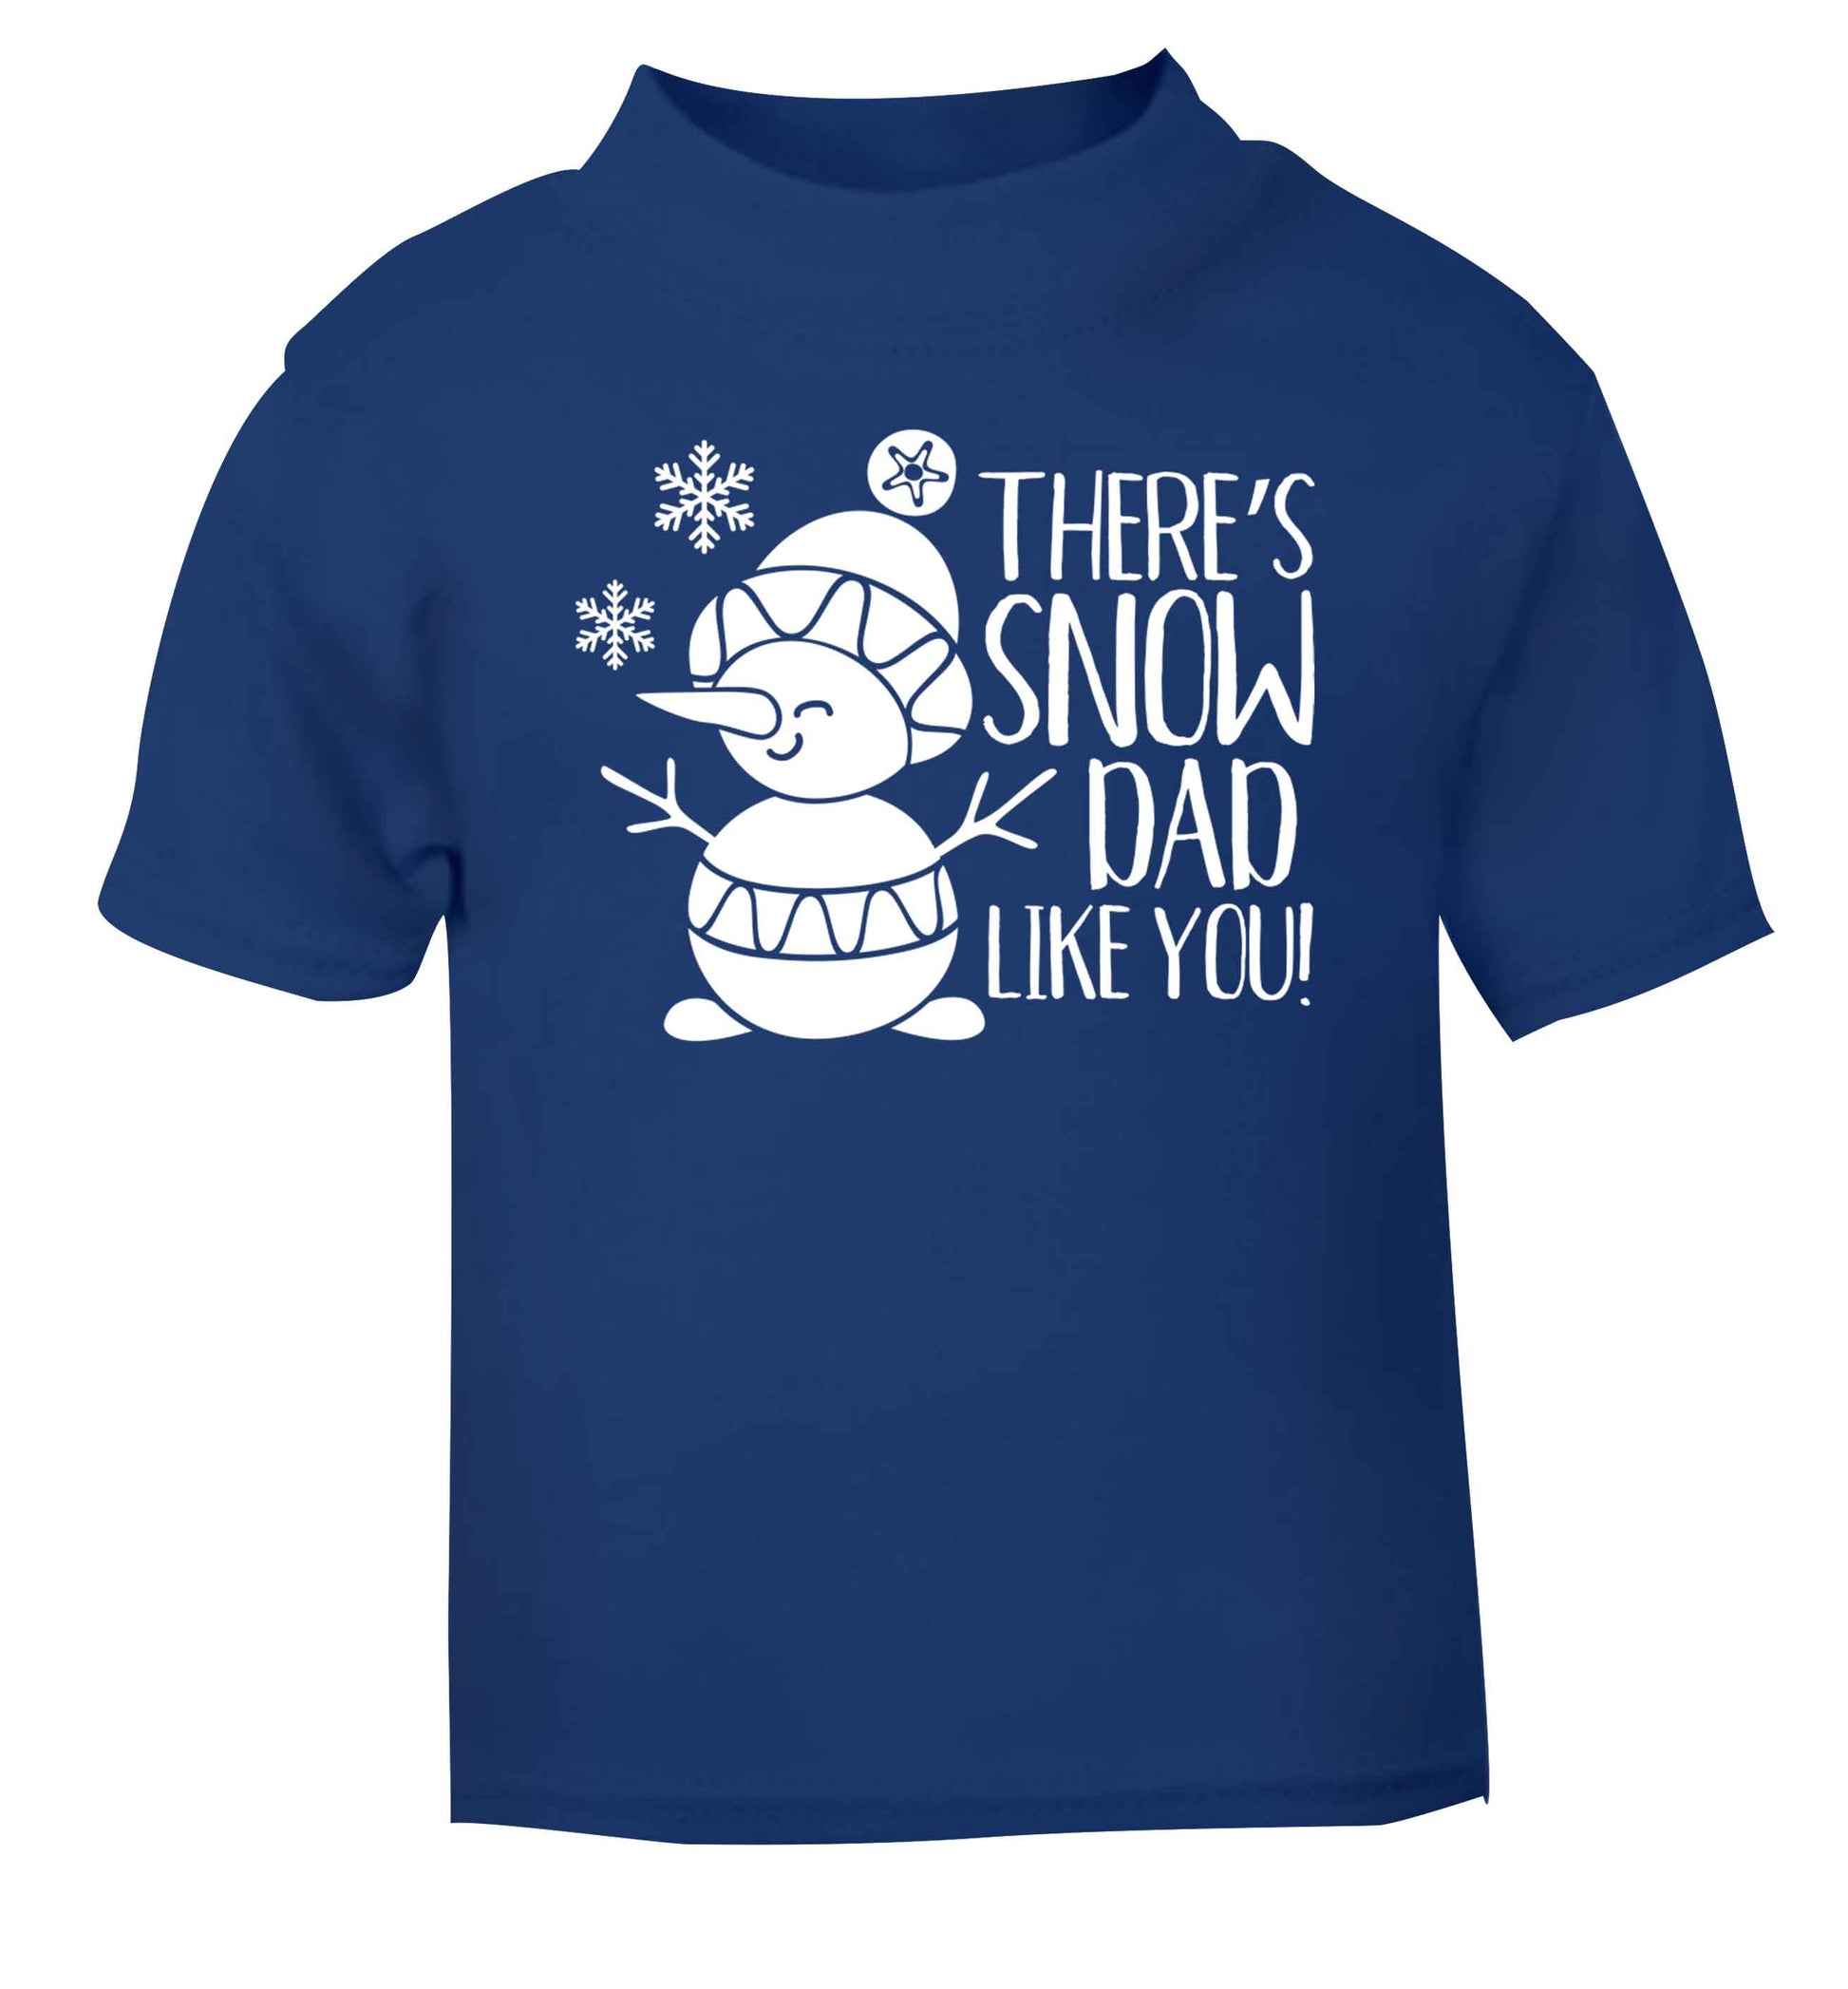 There's snow dad like you blue baby toddler Tshirt 2 Years